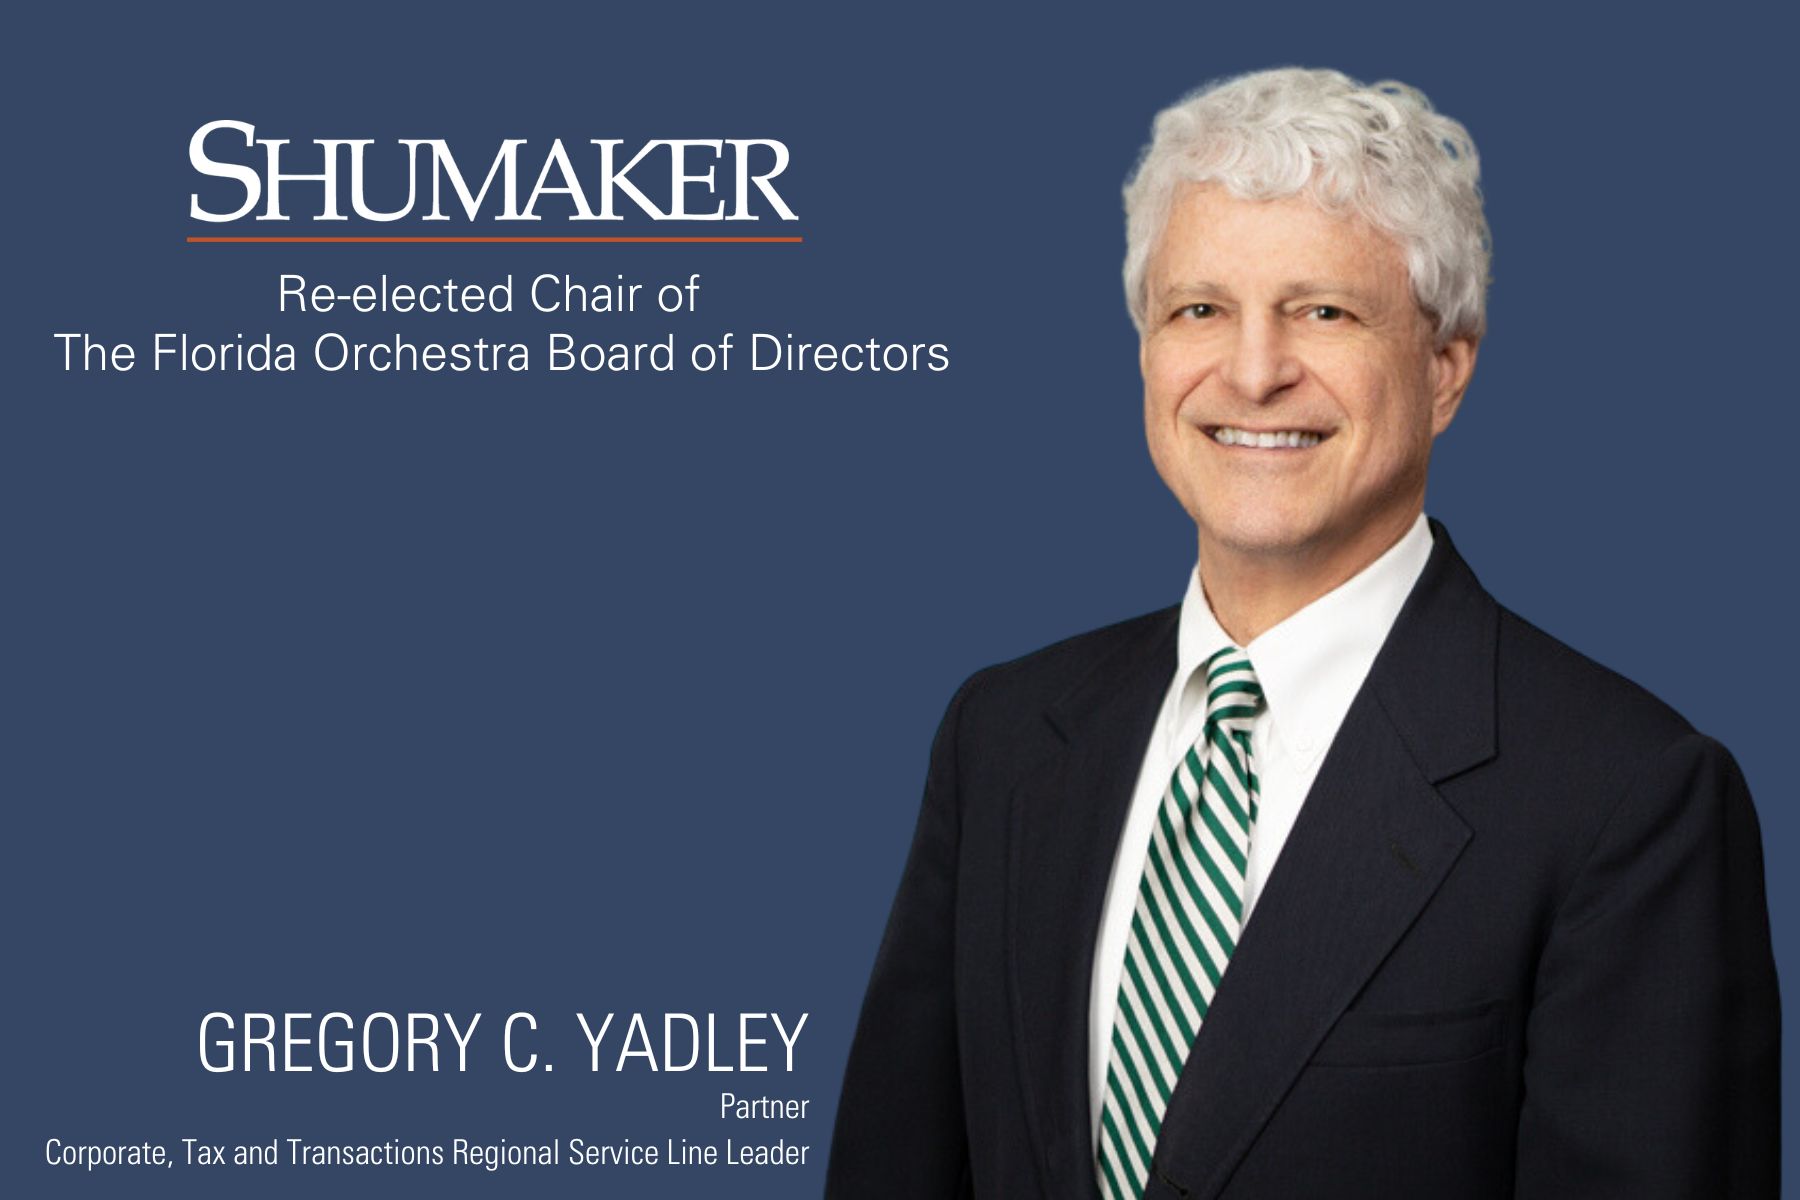 The Florida Orchestra Re-elects Gregory C. Yadley Chair of the Board of Directors